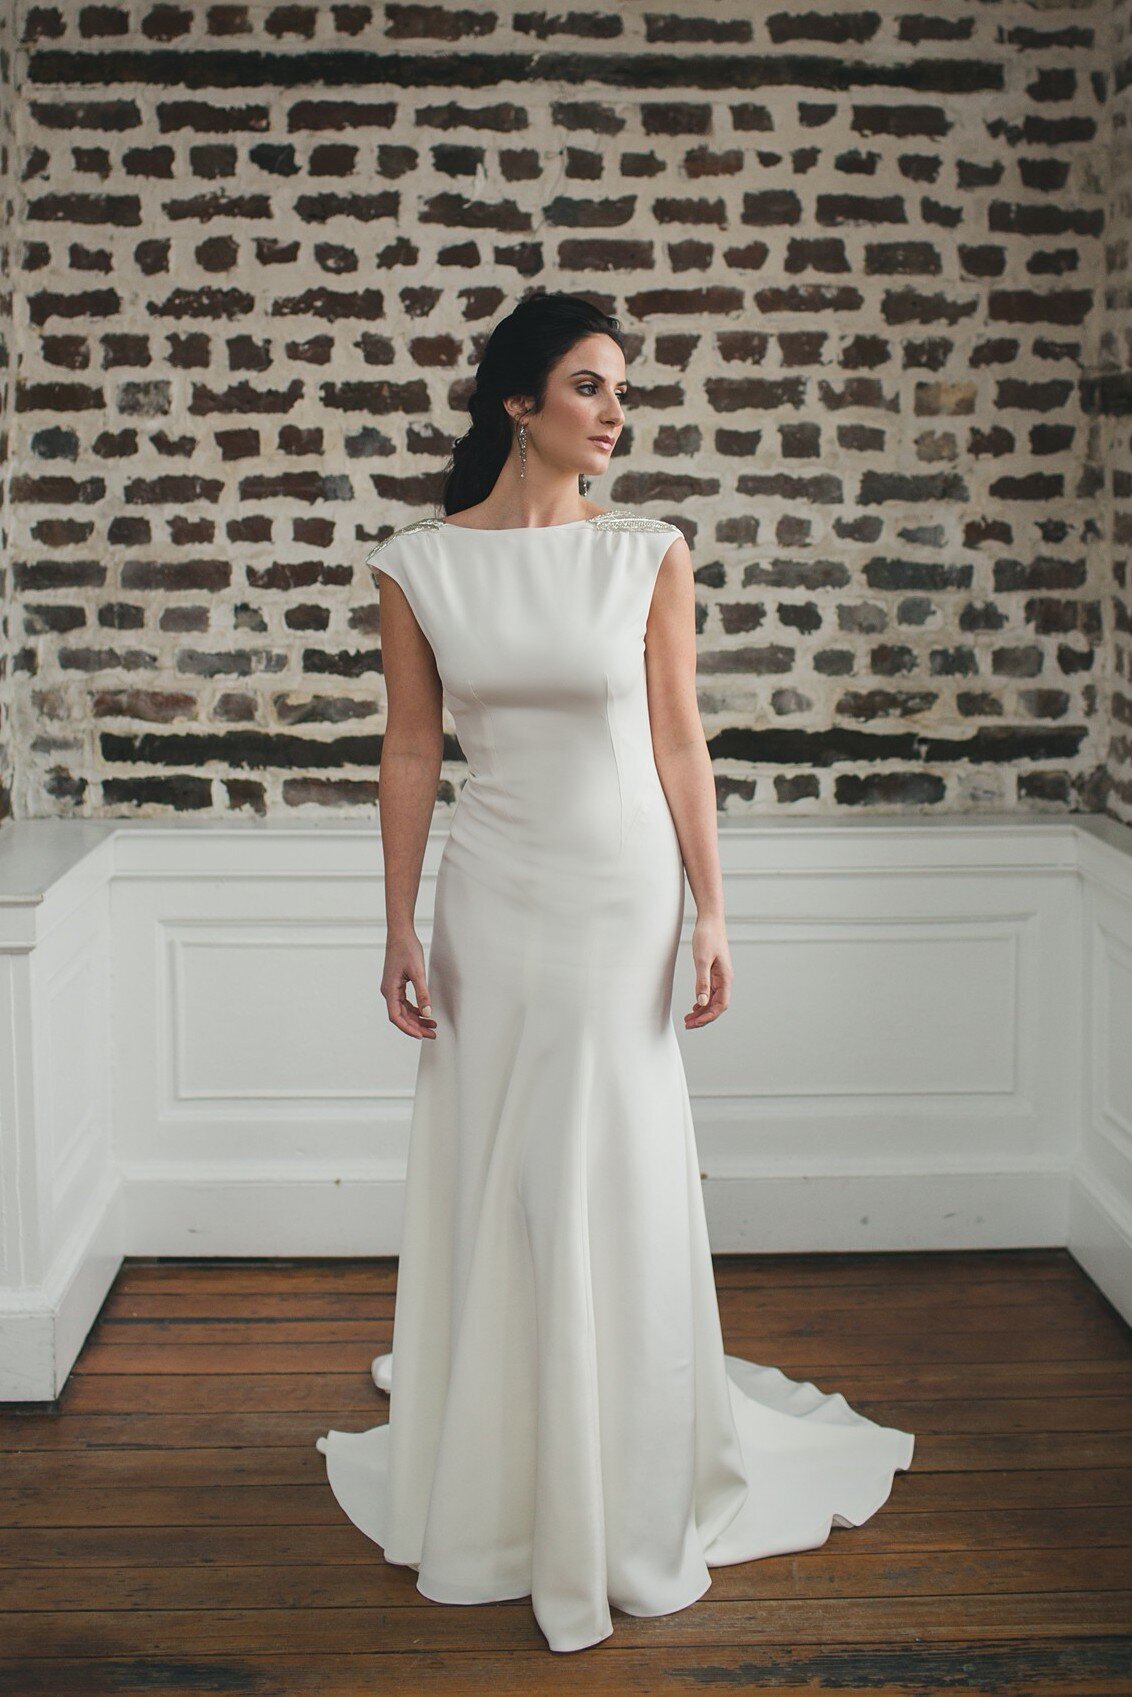 Tamarisk is a crepe wedding gown with a bateau neckline and low back by bridal designer Edith Elan of Charleston, SC.